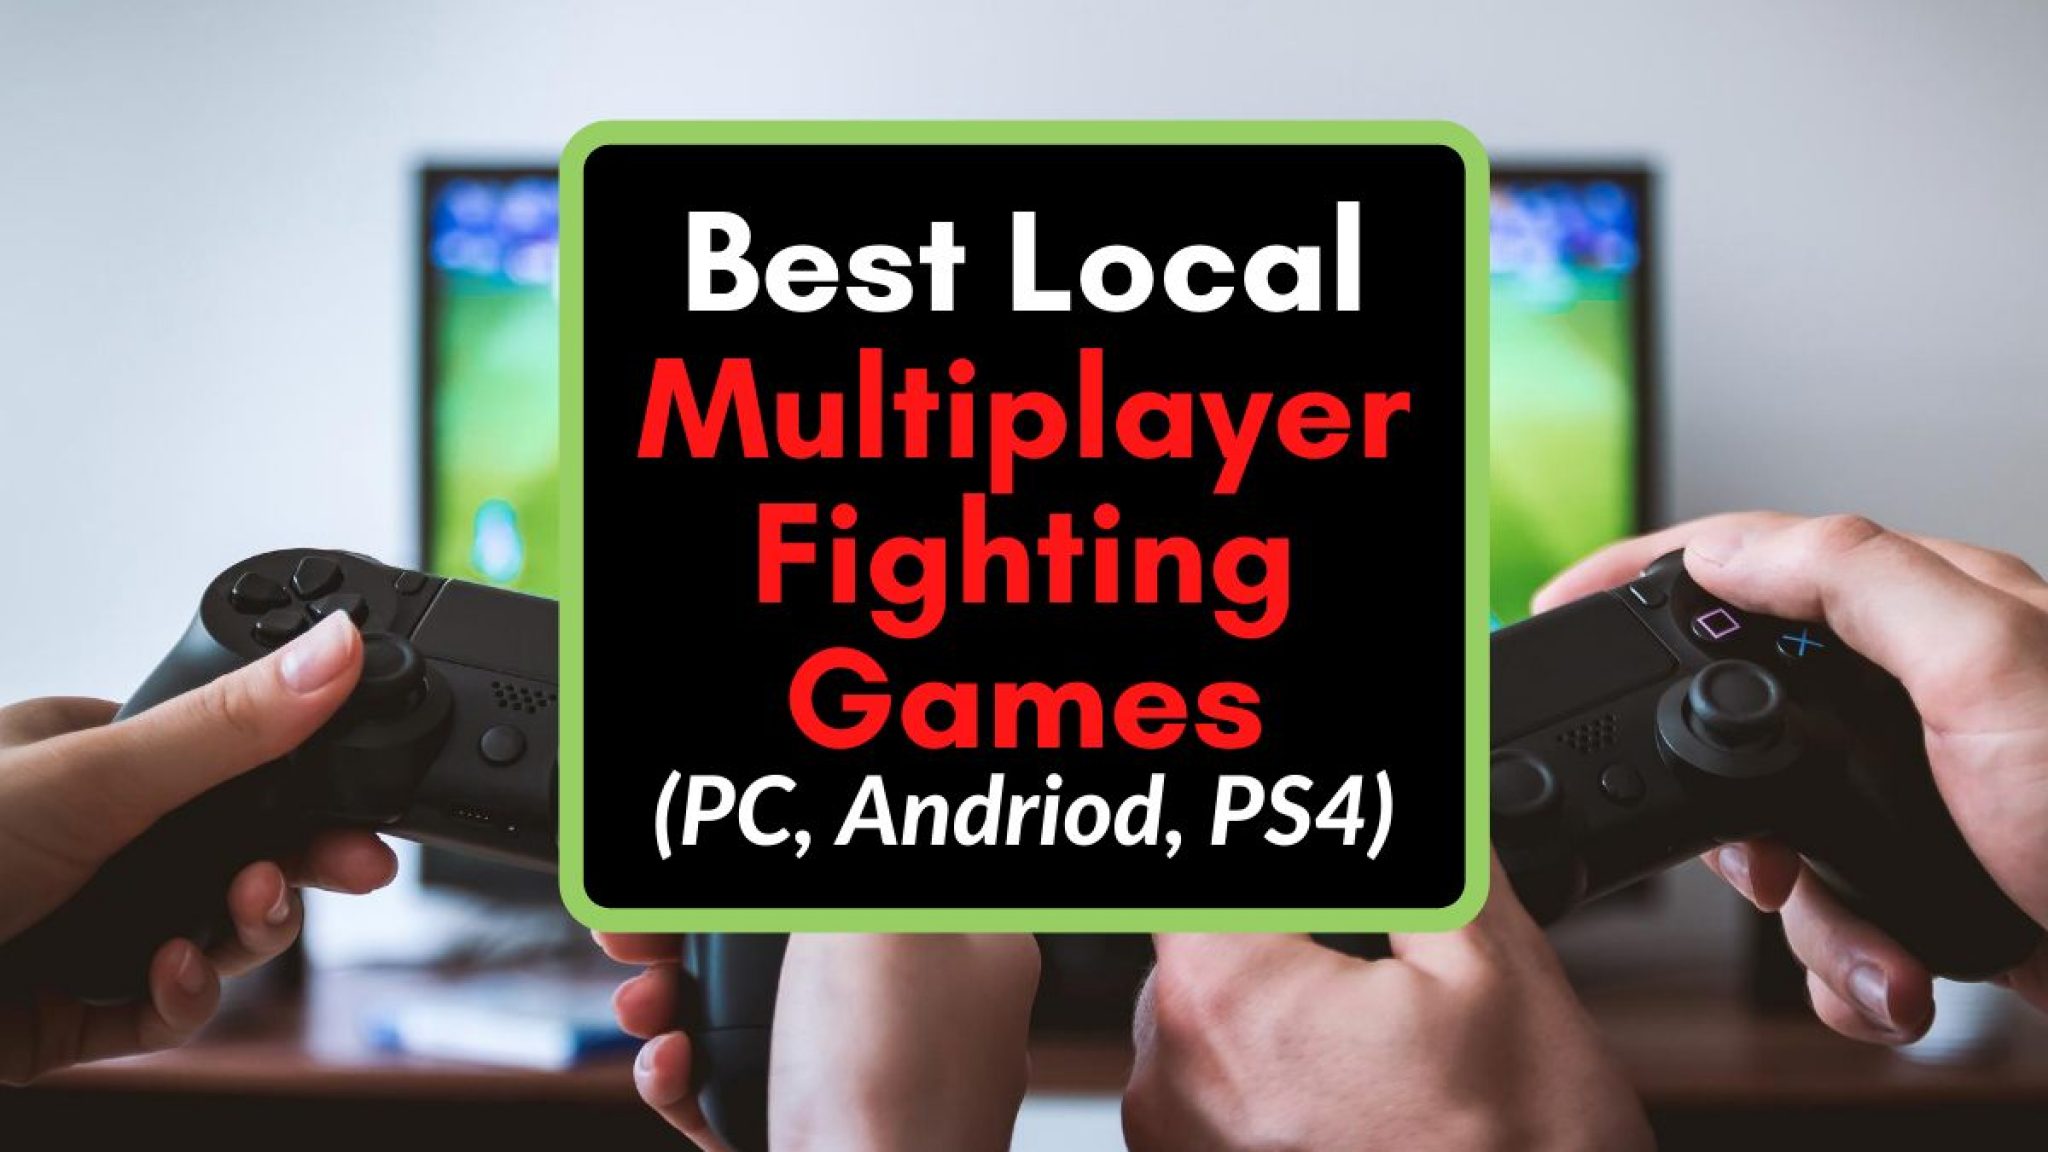 15+ Best Local Multiplayer Fighting Games (PC, Mobile, PS4)